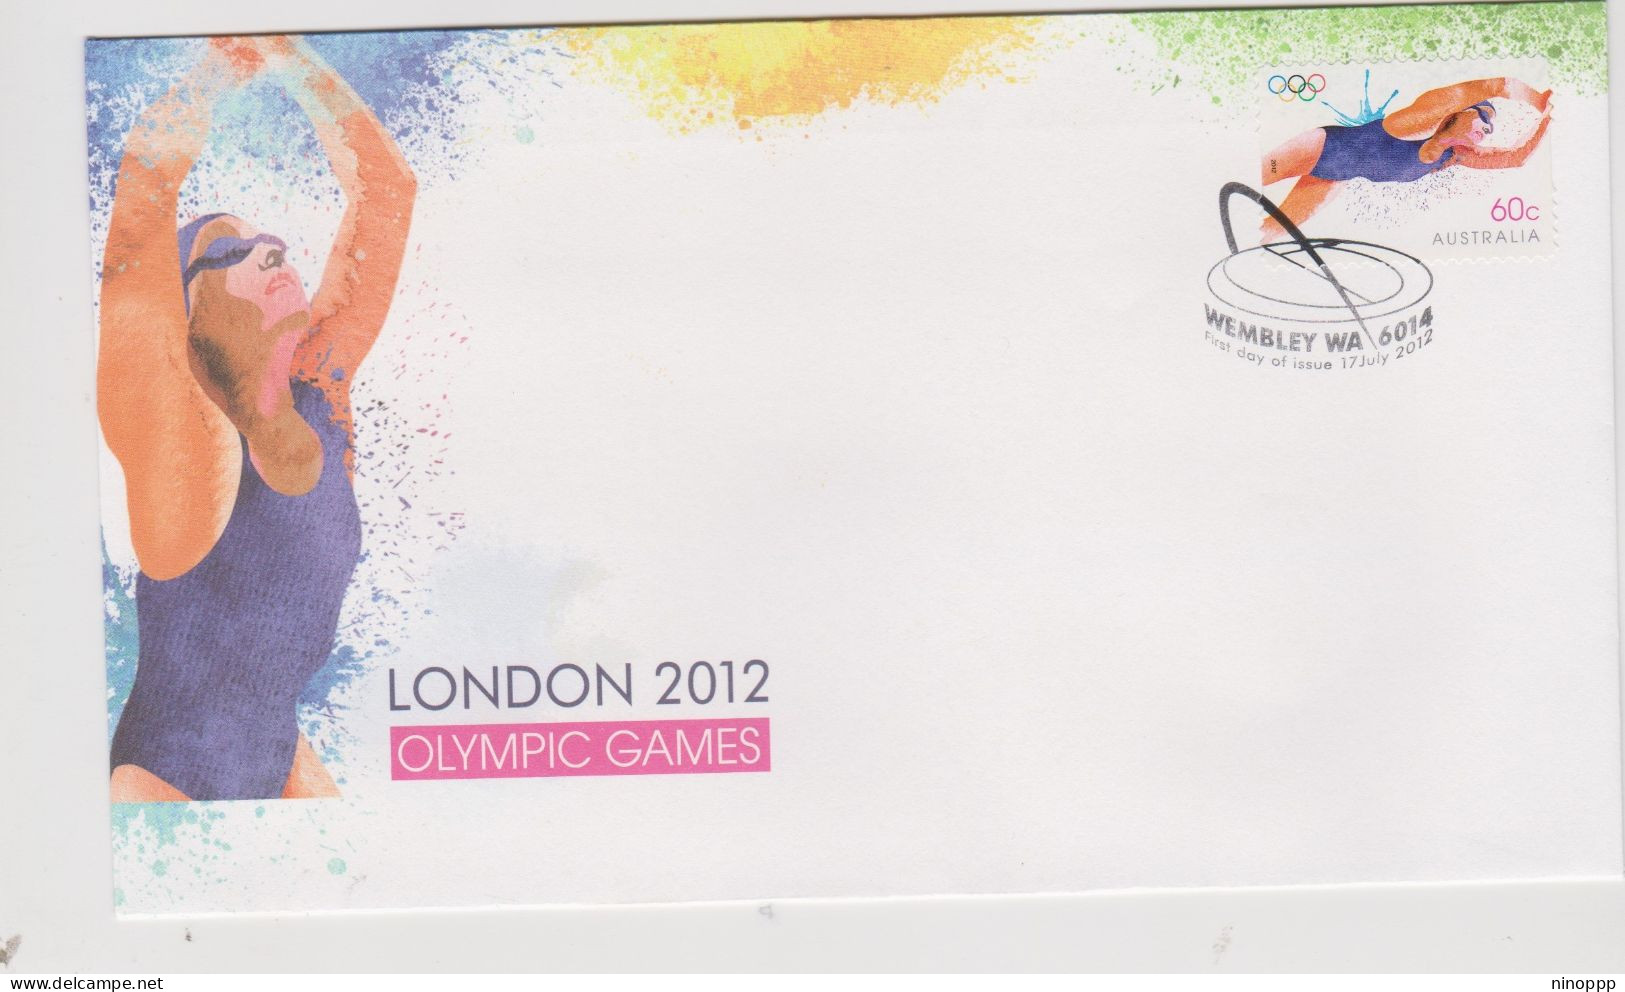 Australia 2012 London Olympic Games Self Adhesivel, First Day Cover - Marcofilia